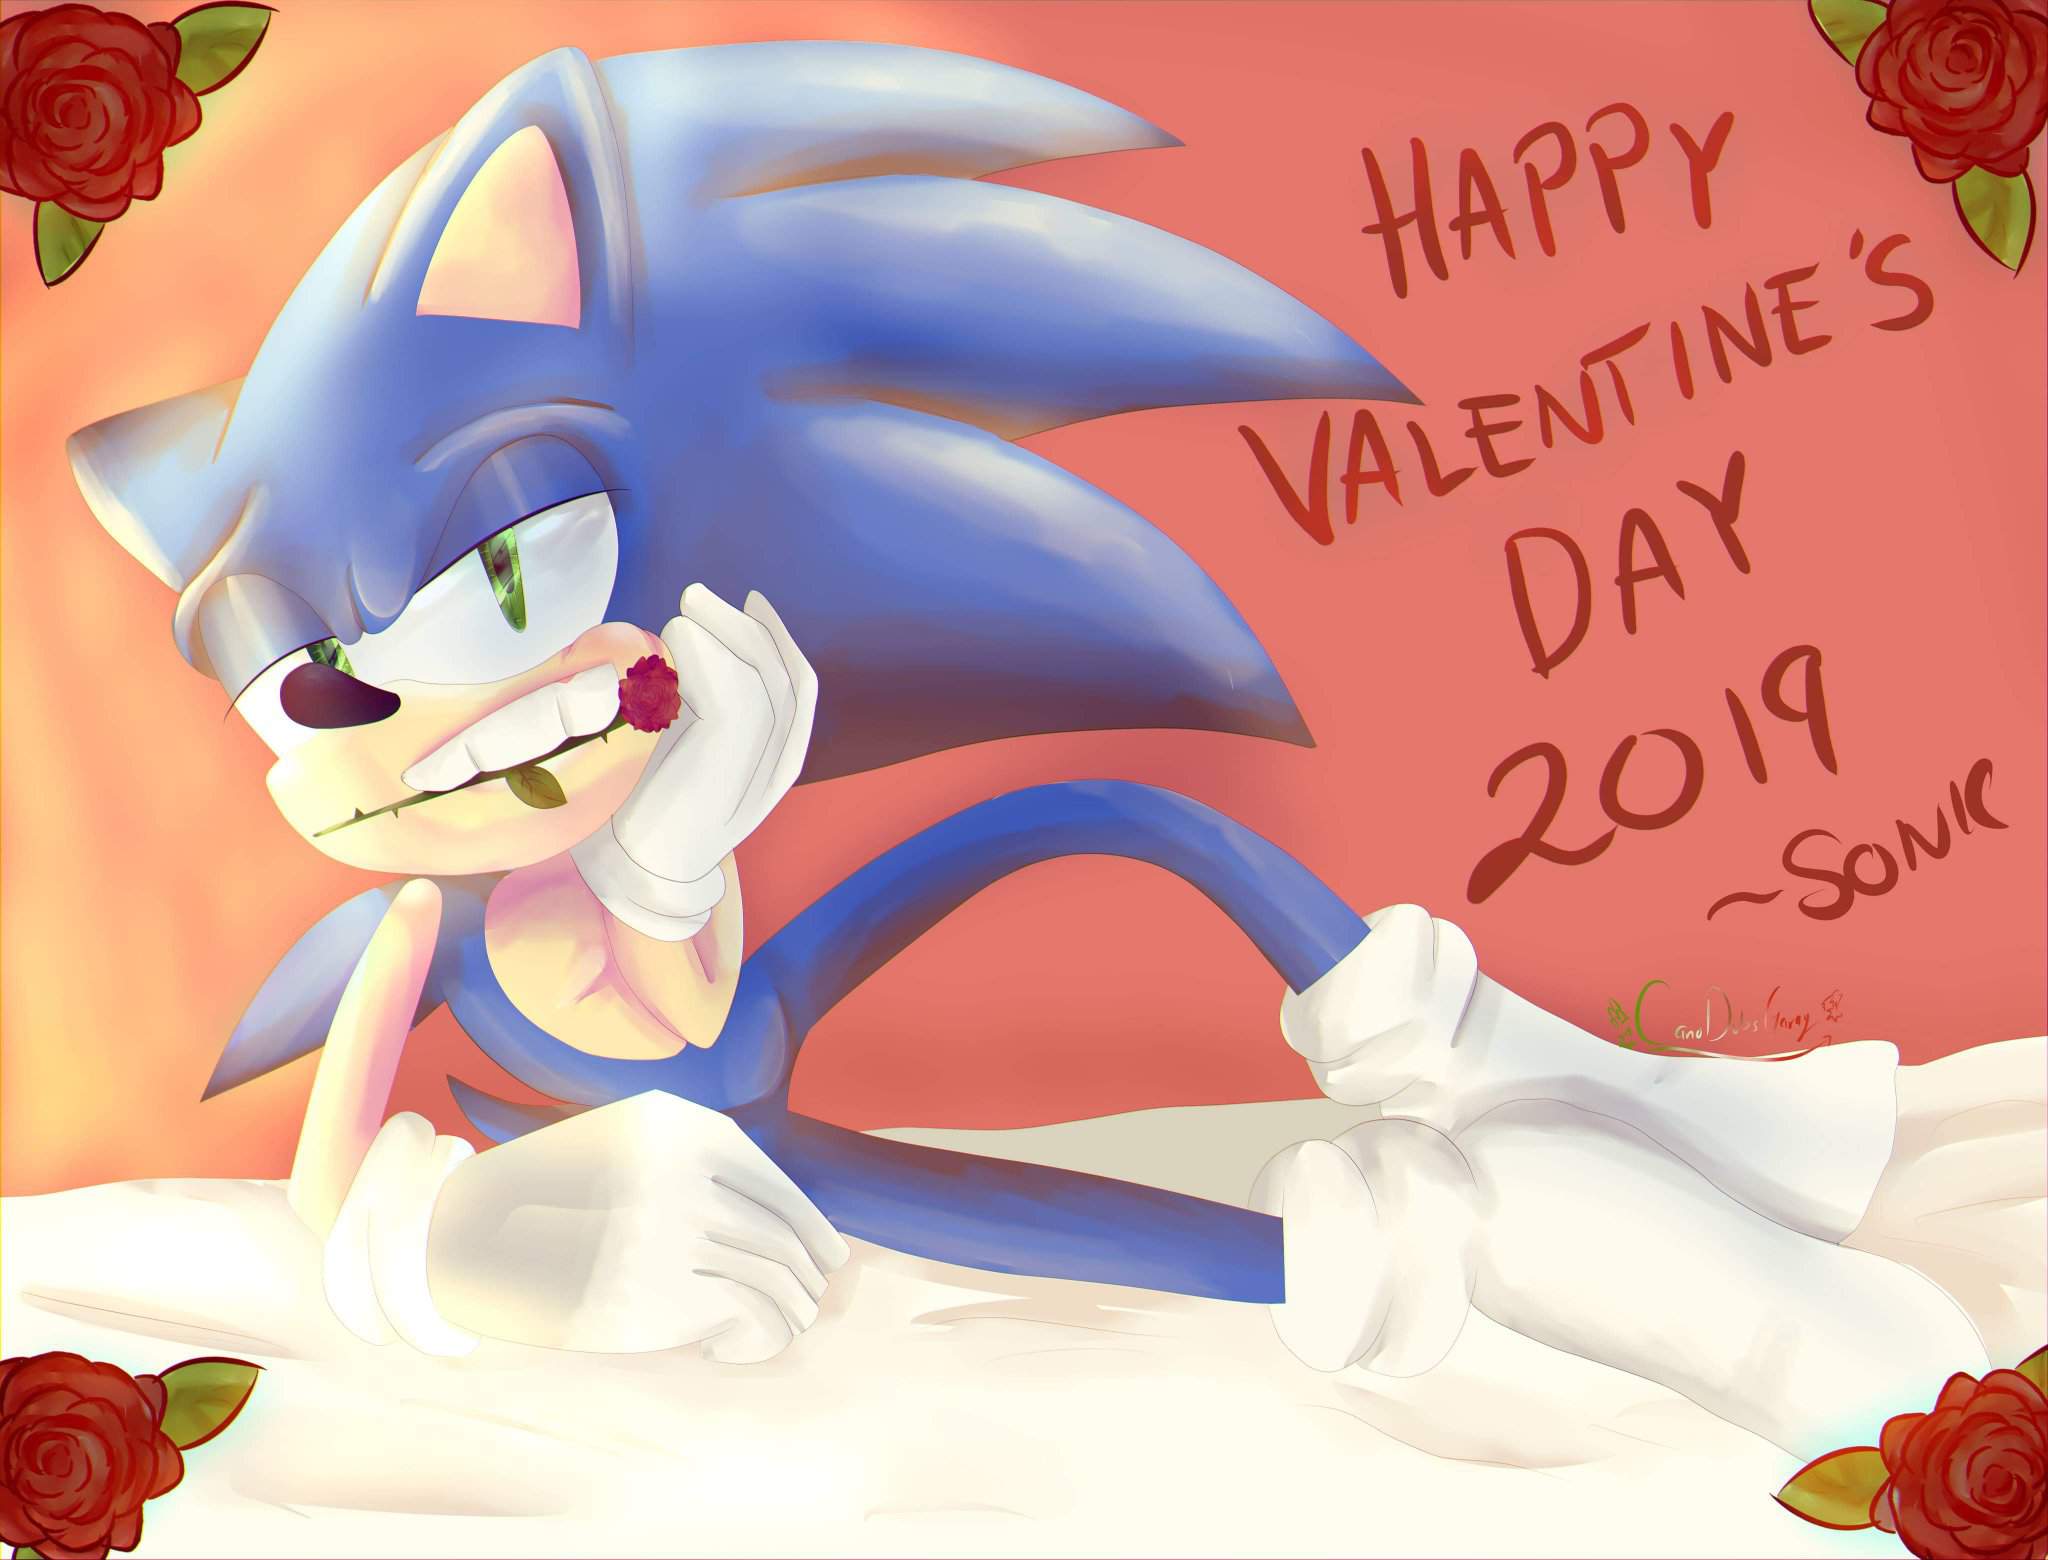 💙 SONIC VALENTINE'S DAY 💙 Sonic the Hedgehog! 